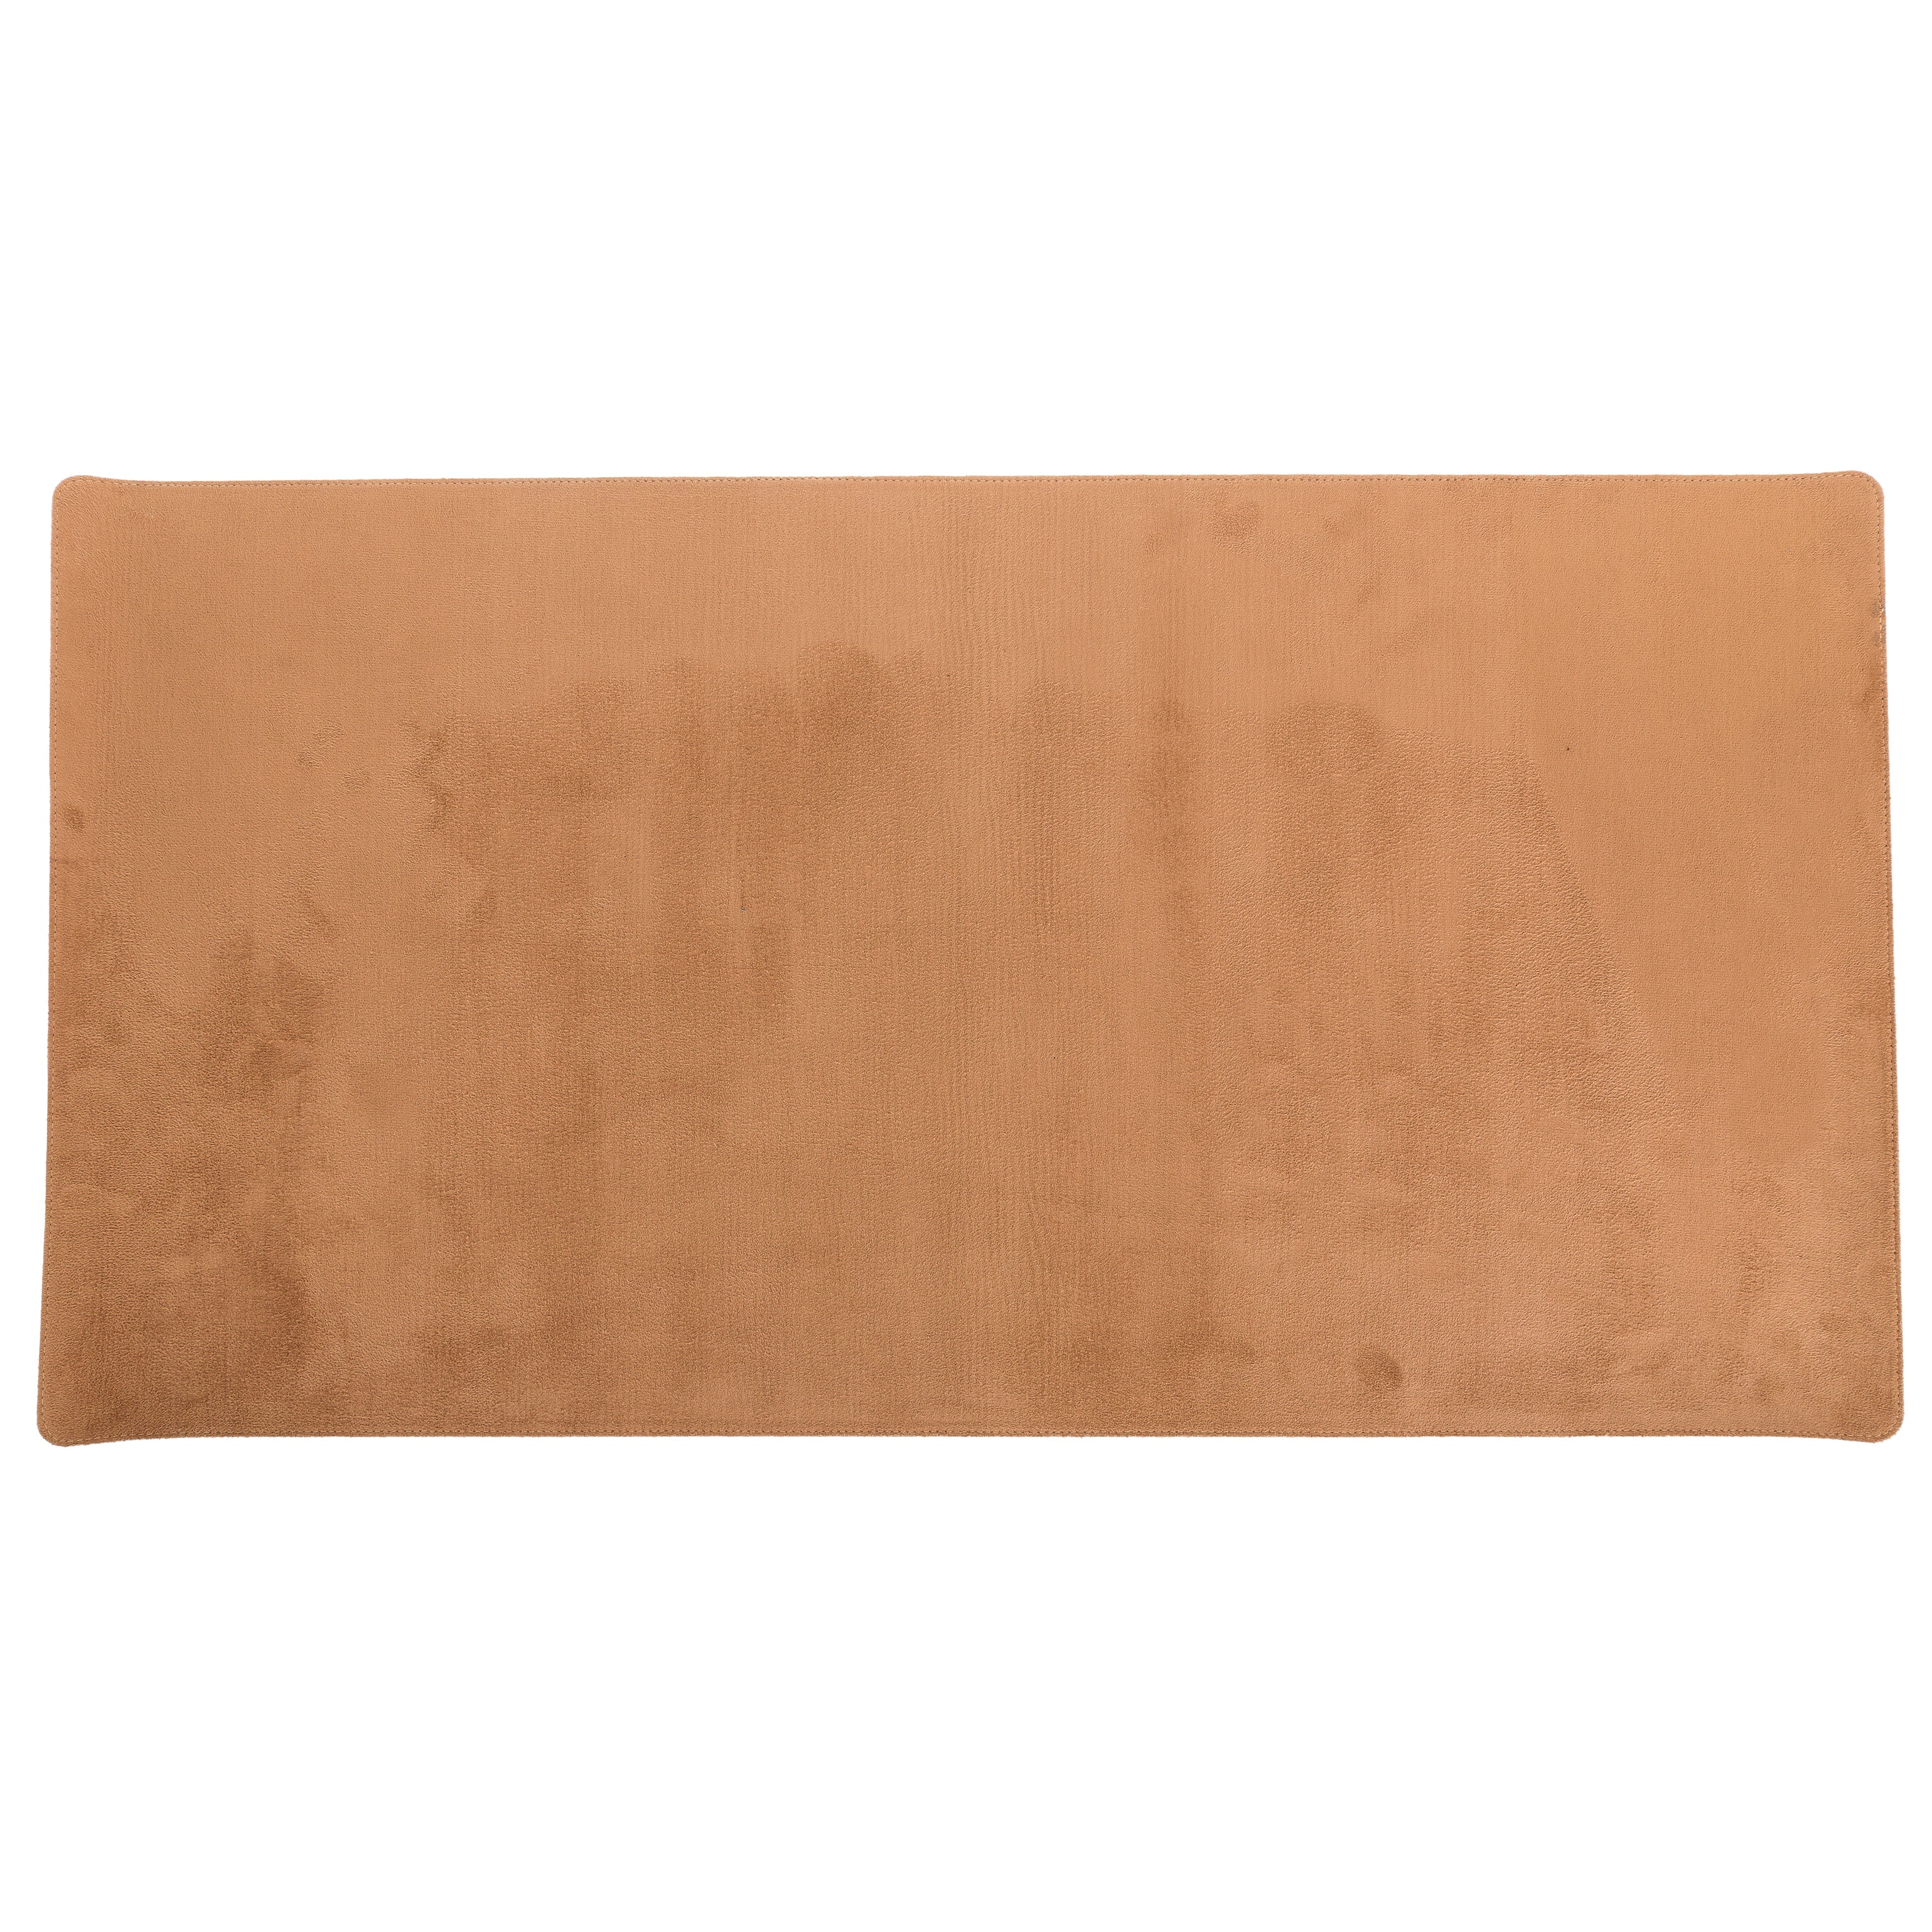 LupinnyLeather Genuine Leather Deskmat, Computer Pad, Office Desk Pad (Brown) 8